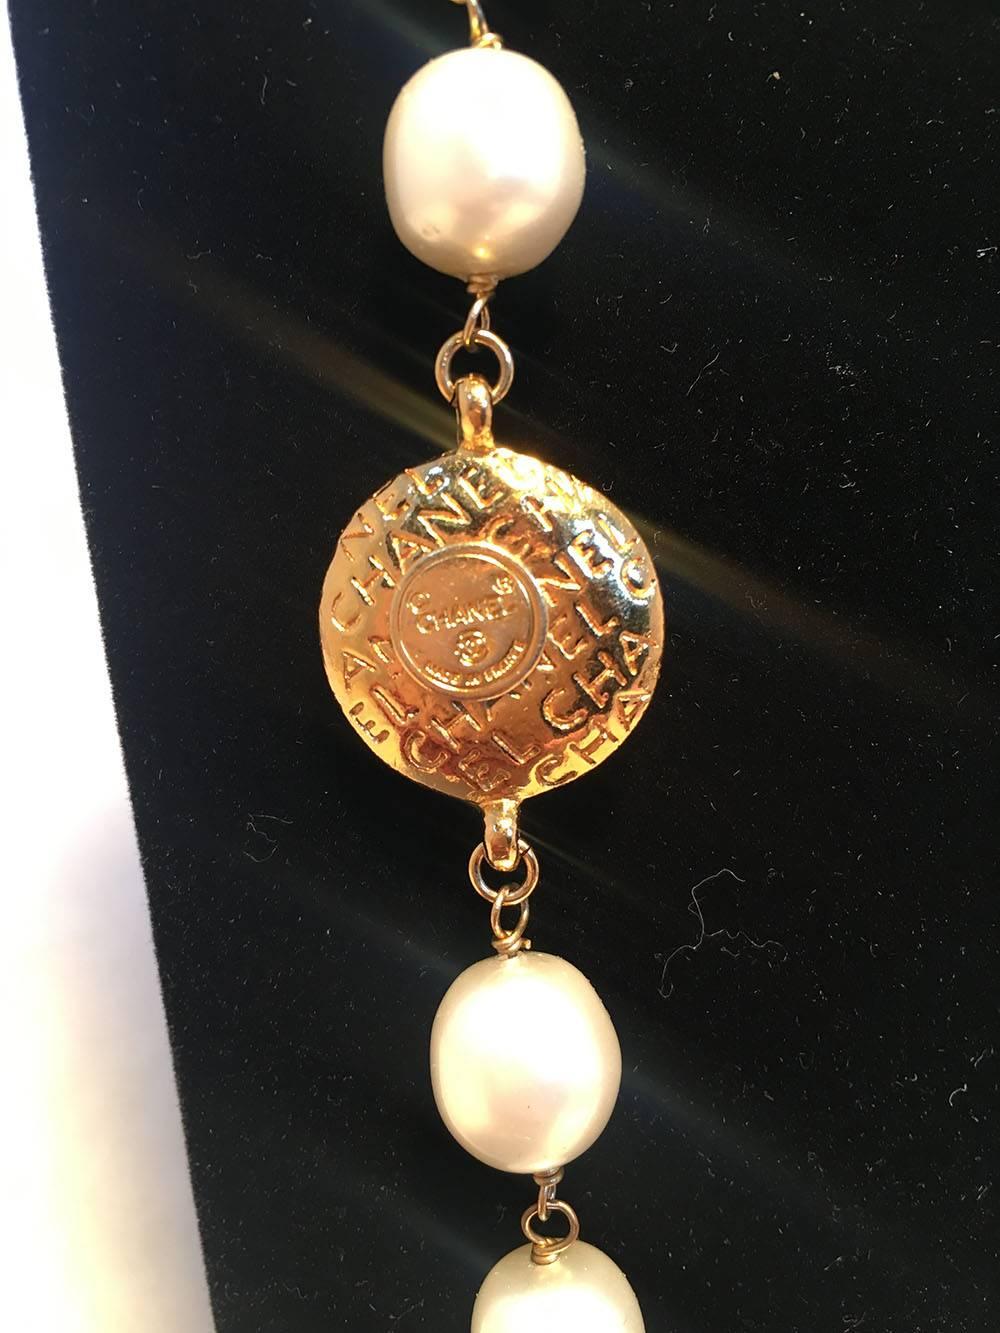 BEAUTIFUL Chanel pearl and gold coin necklace in excellent vintage condition. Delicate pearls strung together with gold plated coins throughout. Each coin features either the iconic profile of Coco Chanel wearing a hat or the Chanel name engraved in